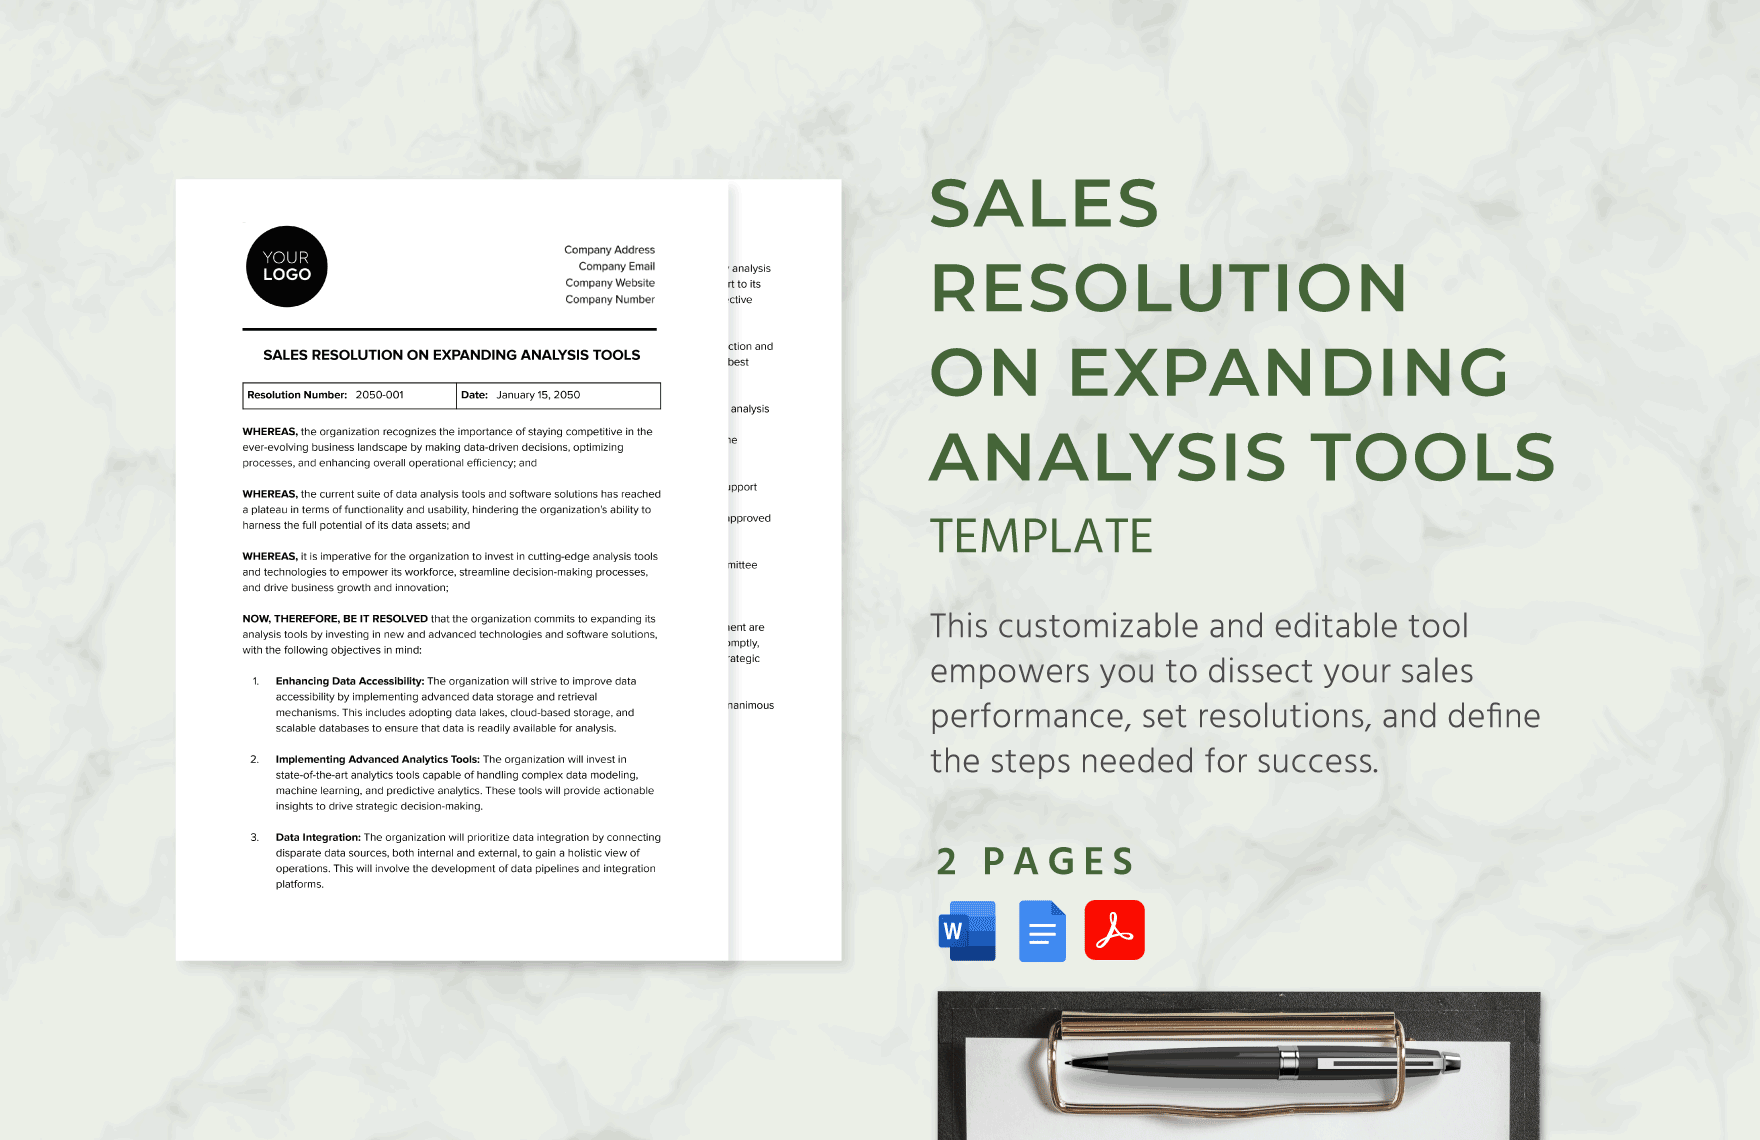 Sales Resolution on Expanding Analysis Tools Template